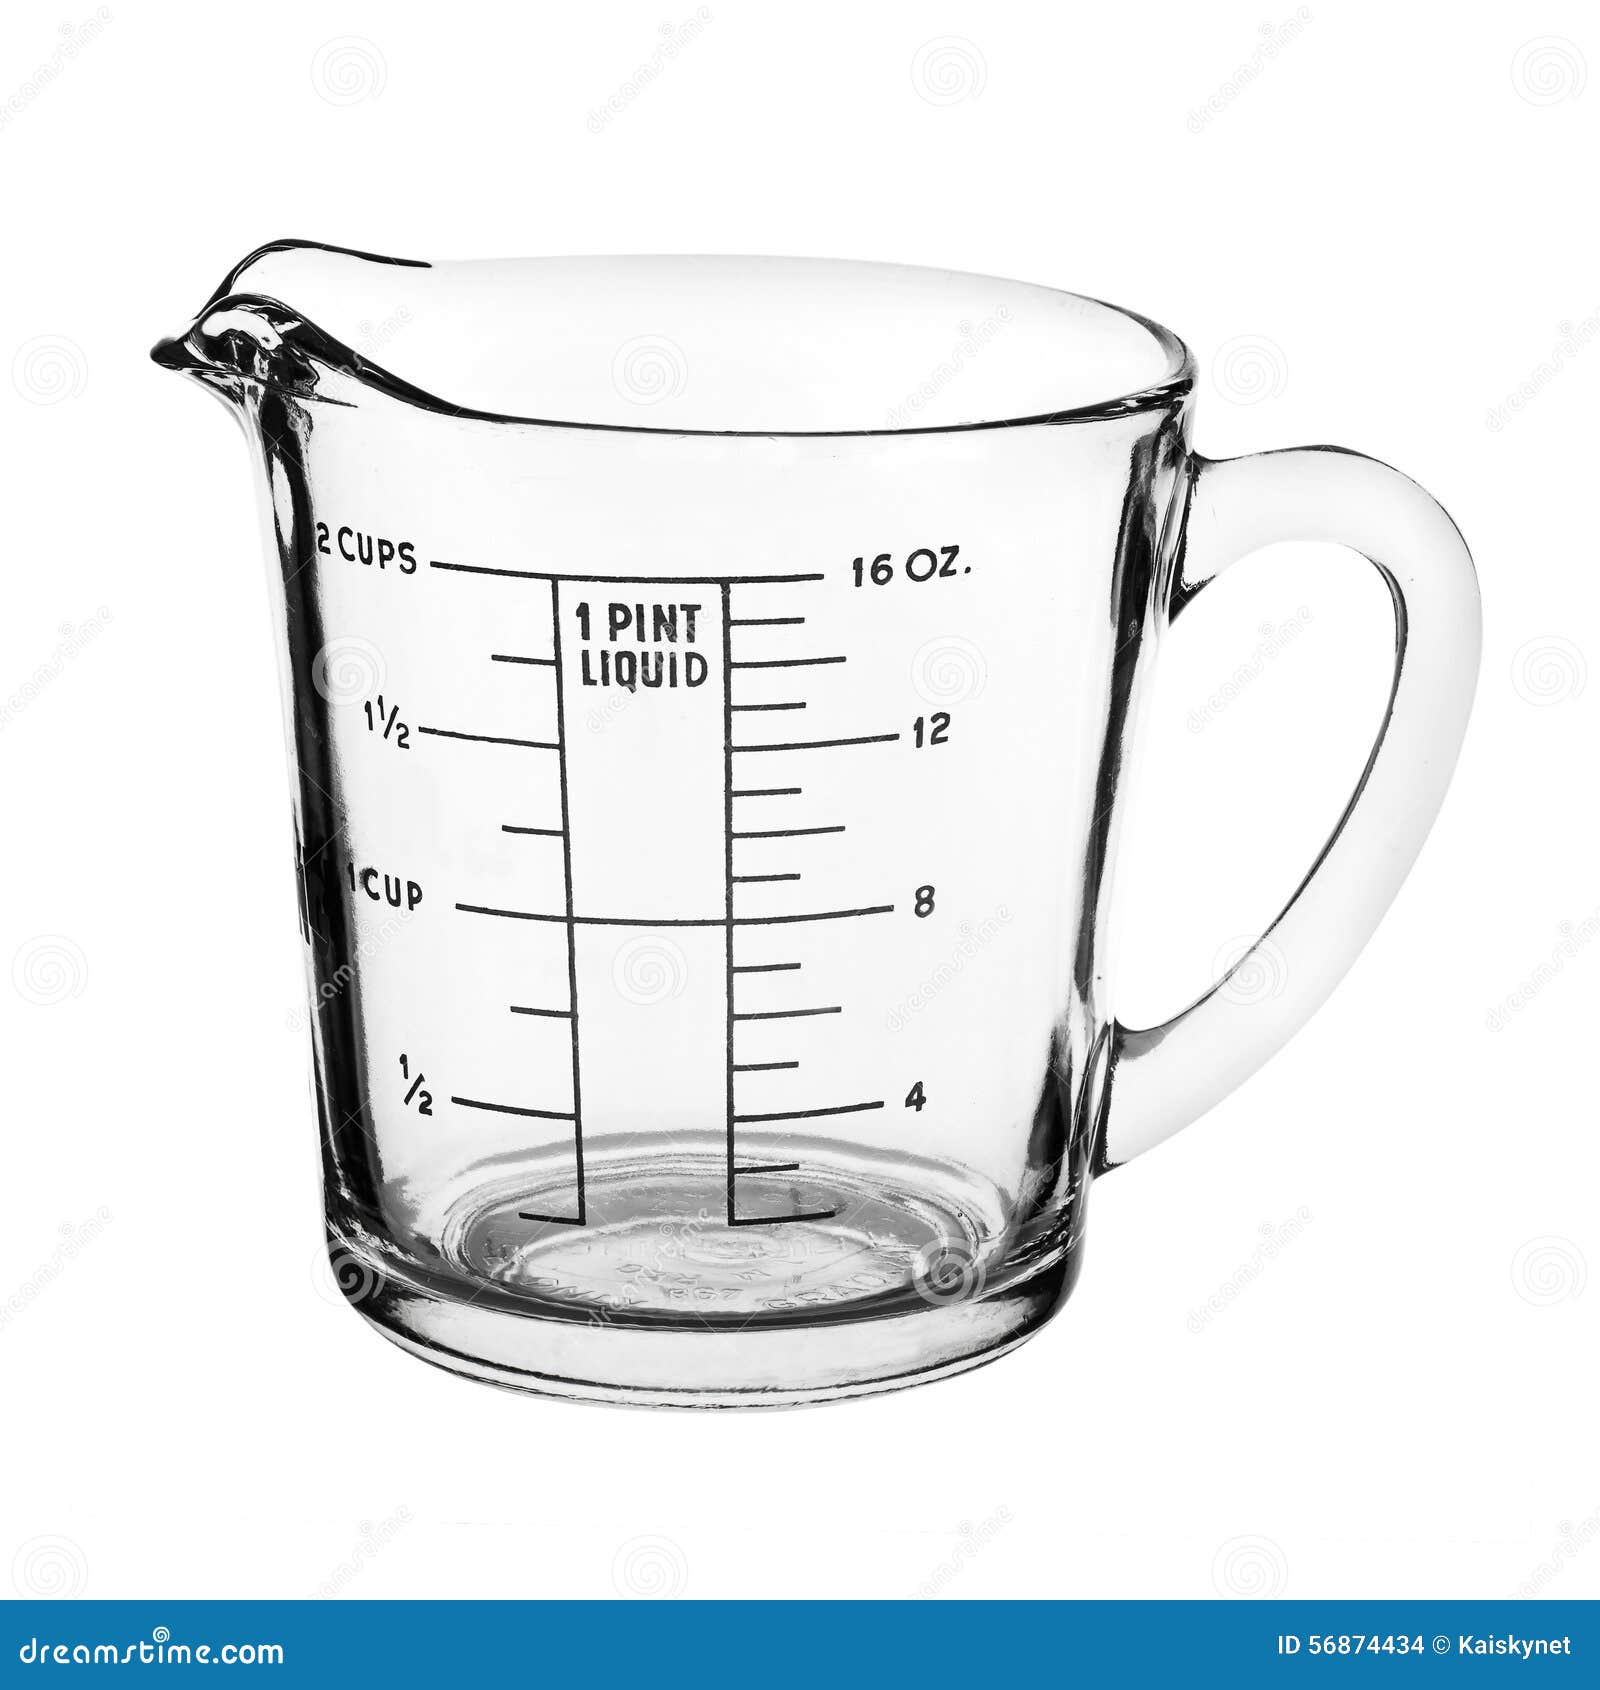 https://thumbs.dreamstime.com/z/measuring-cup-isolated-white-background-56874434.jpg